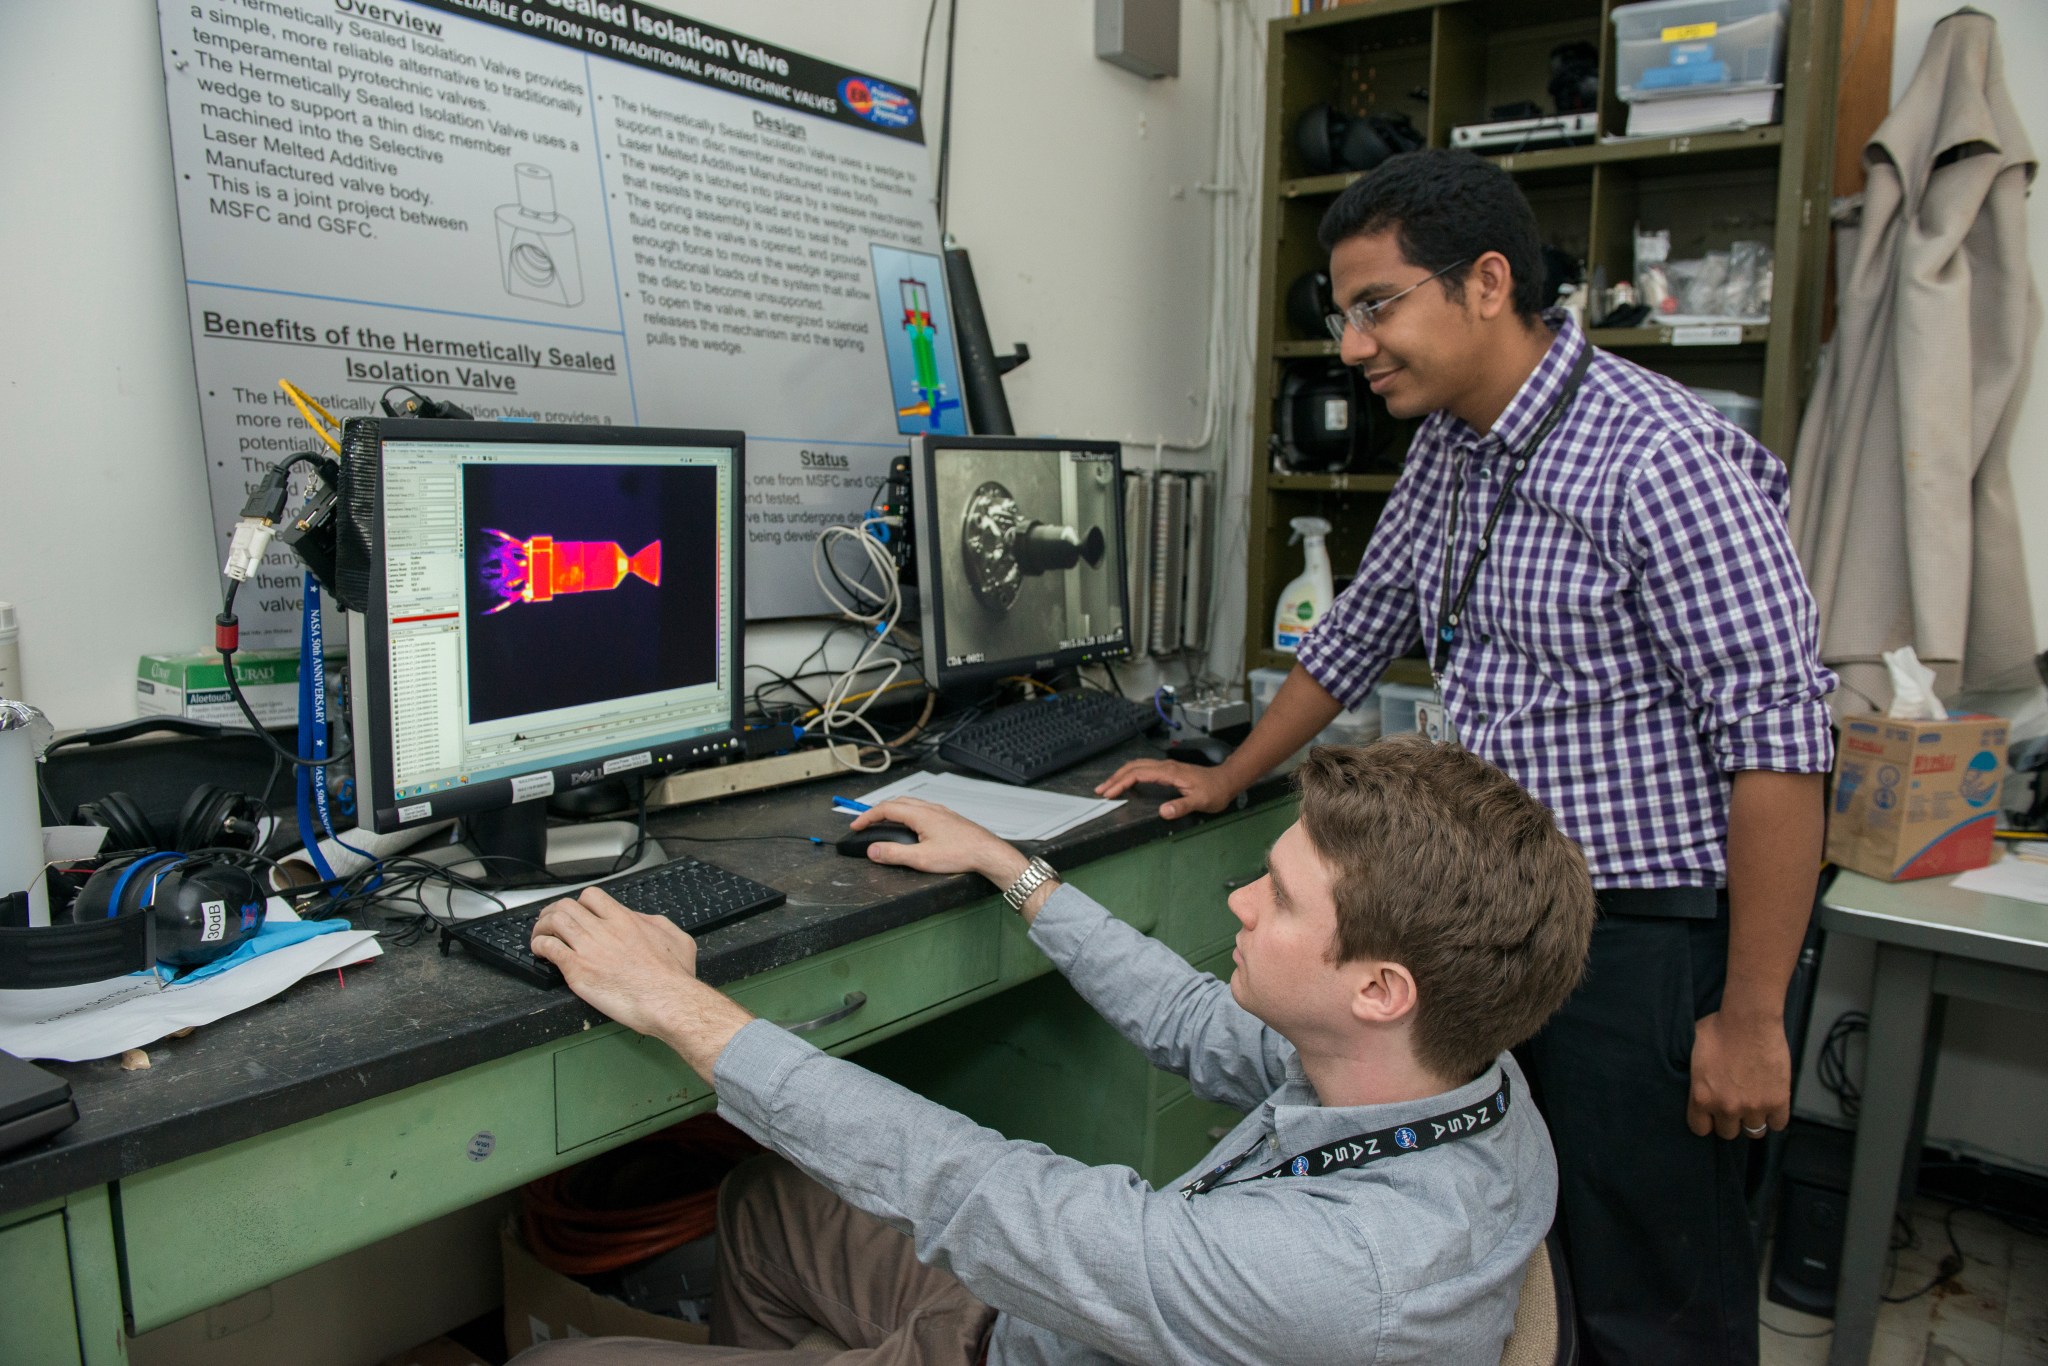 NASA engineers monitor temperature data on the left computer screen as a thruster fueled with the green propellantis fired.